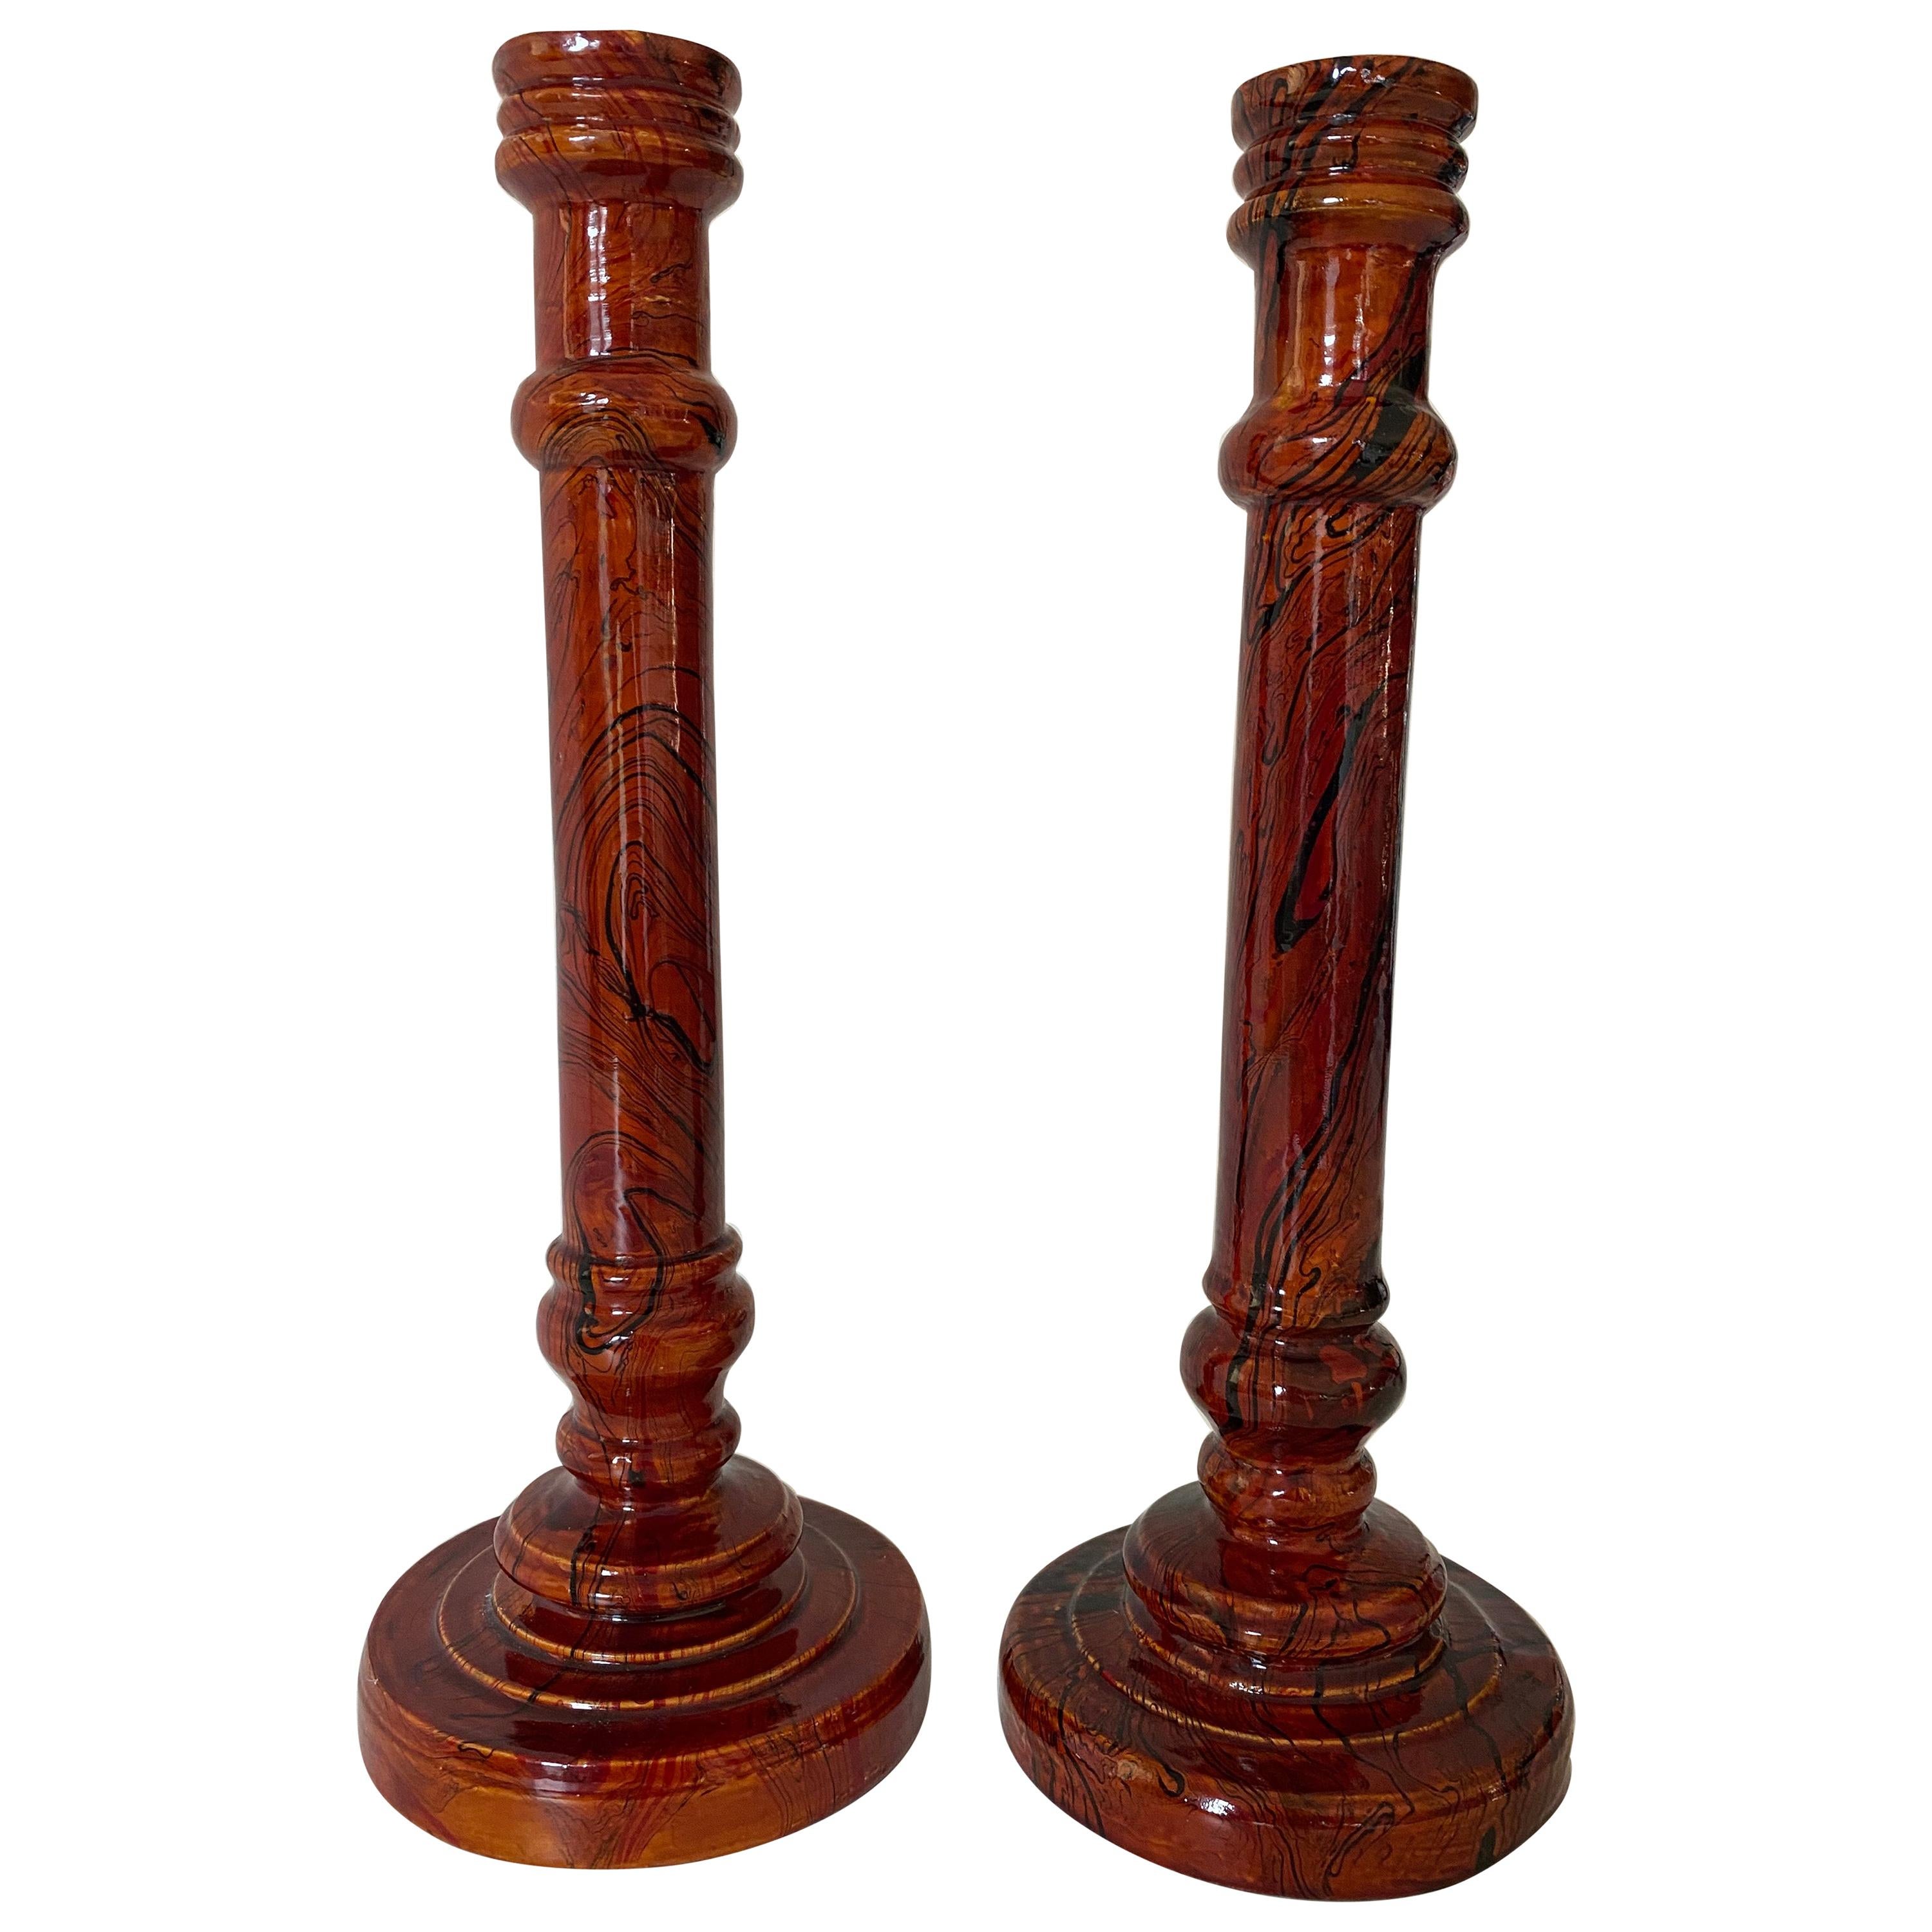 Pair of Marbled Wood Candlesticks